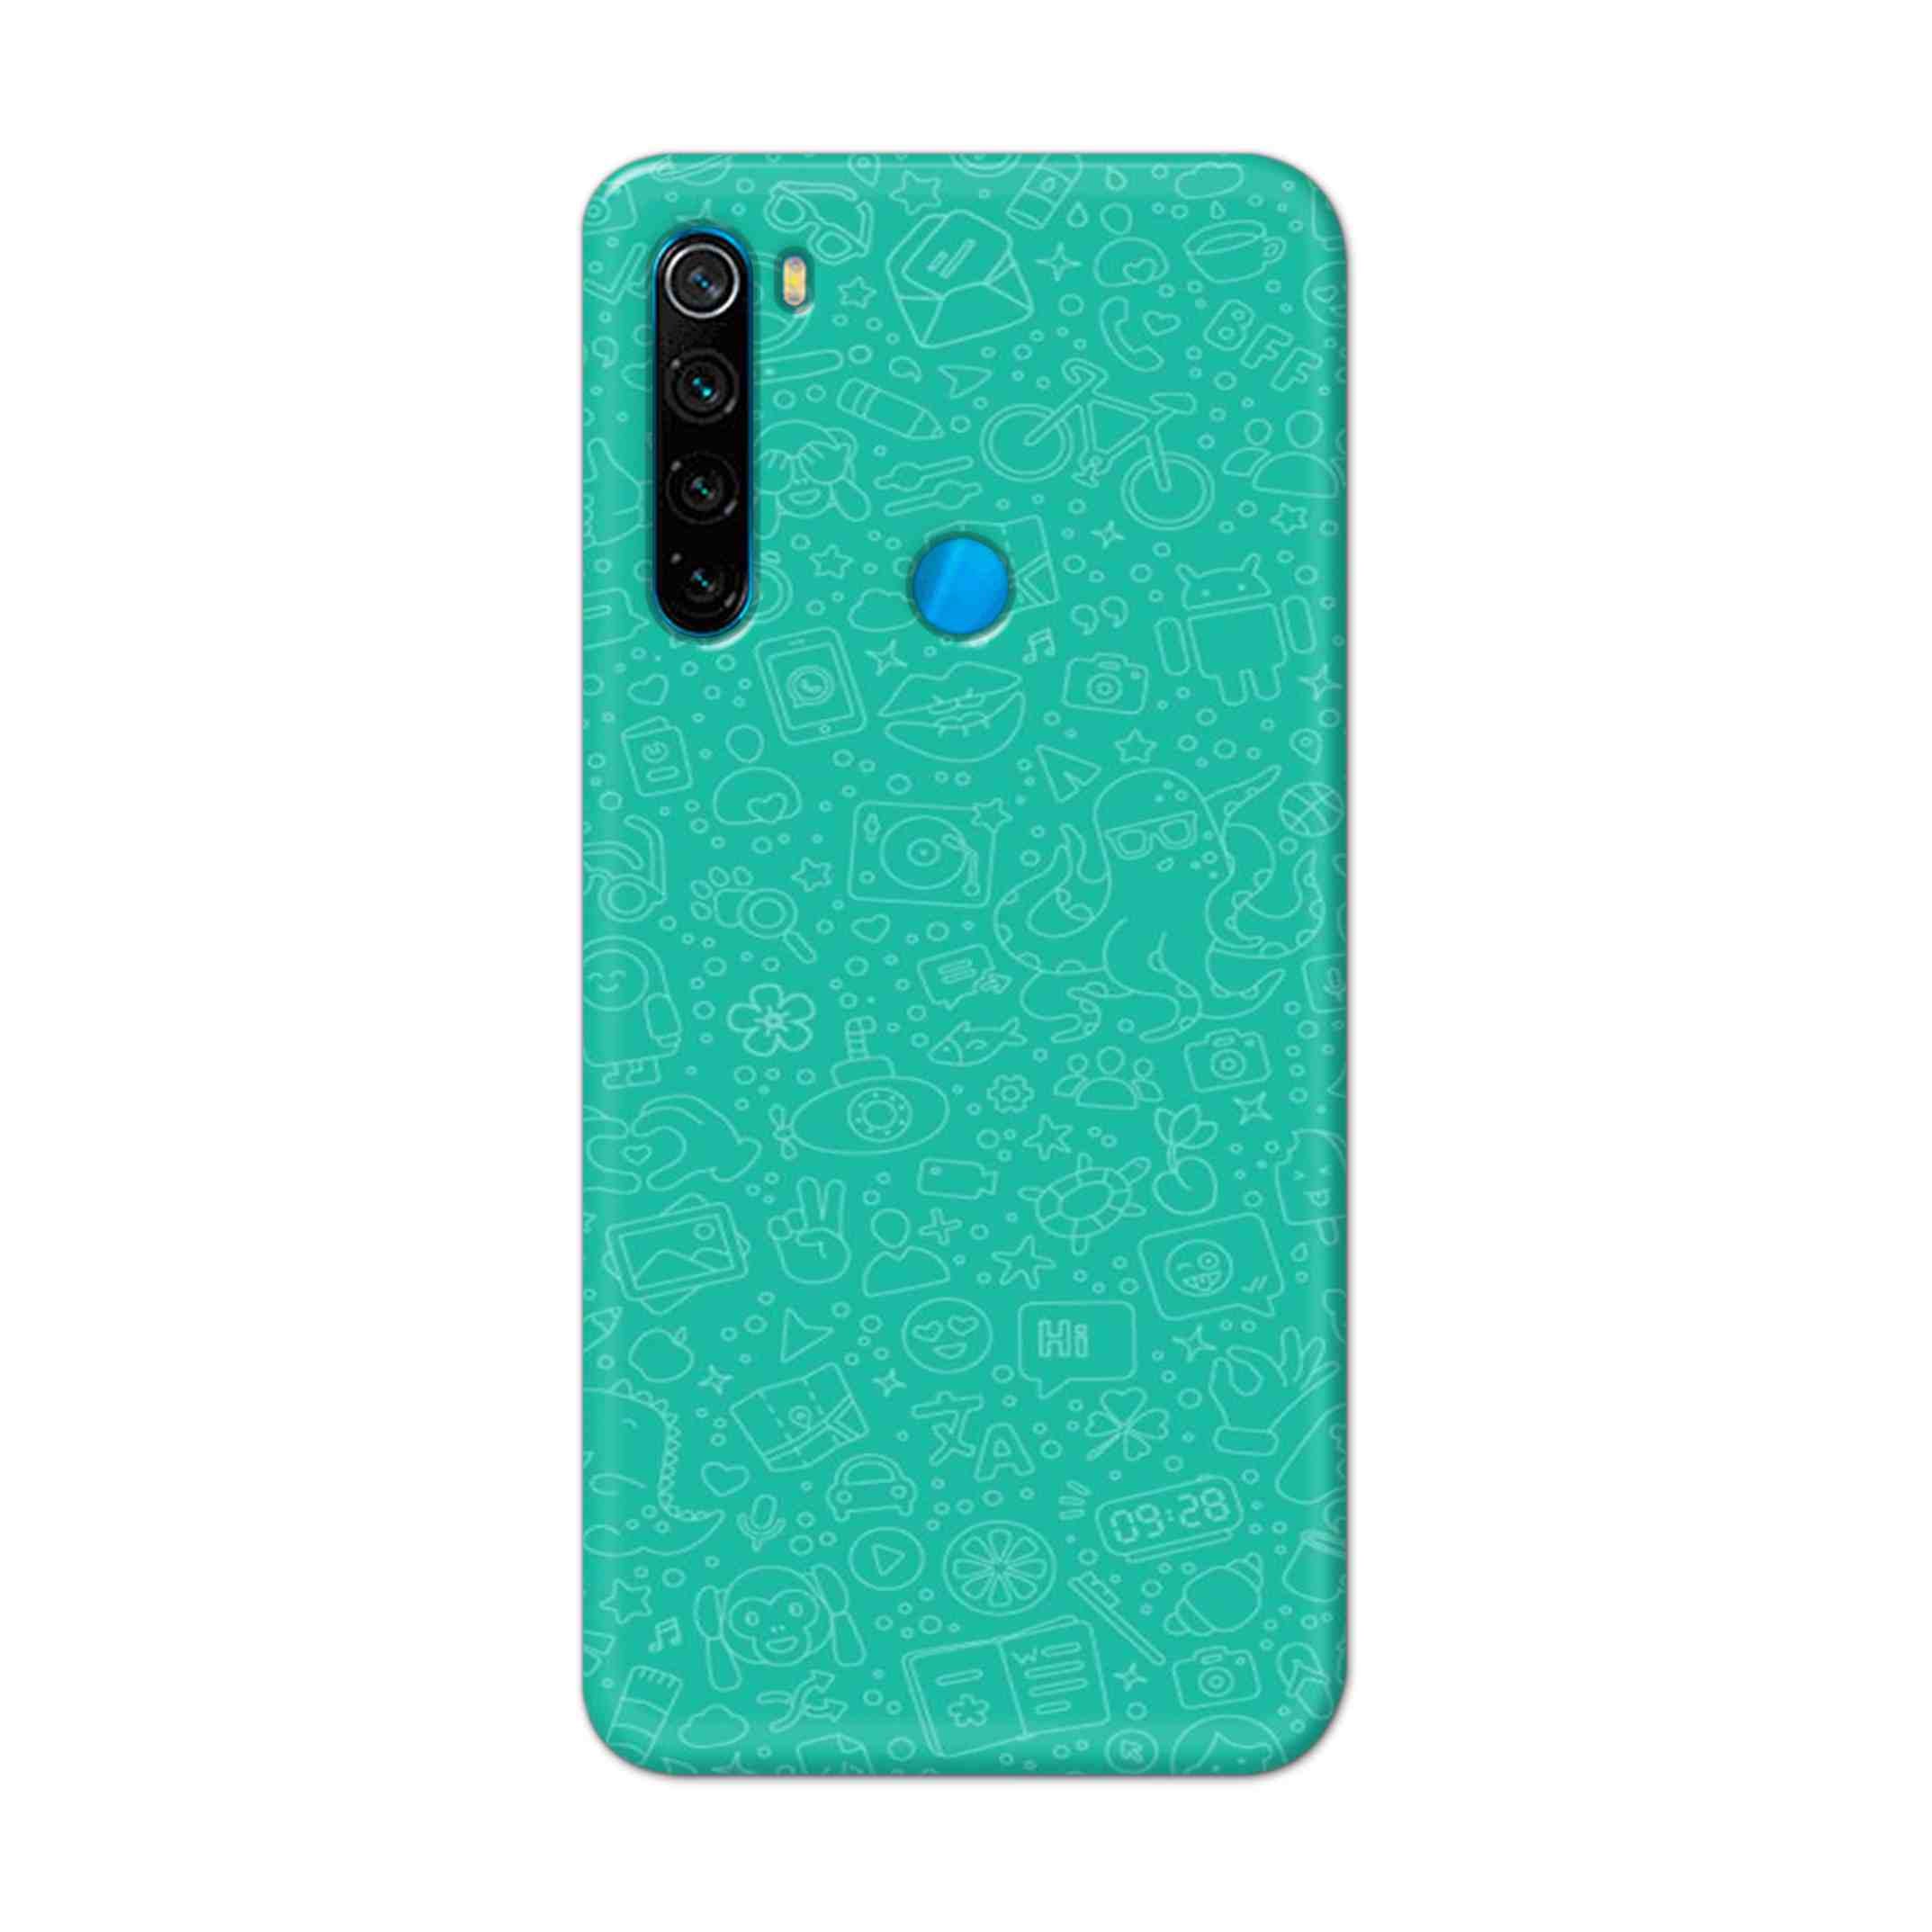 Buy Whatsapp Hard Back Mobile Phone Case Cover For Xiaomi Redmi Note 8 Online